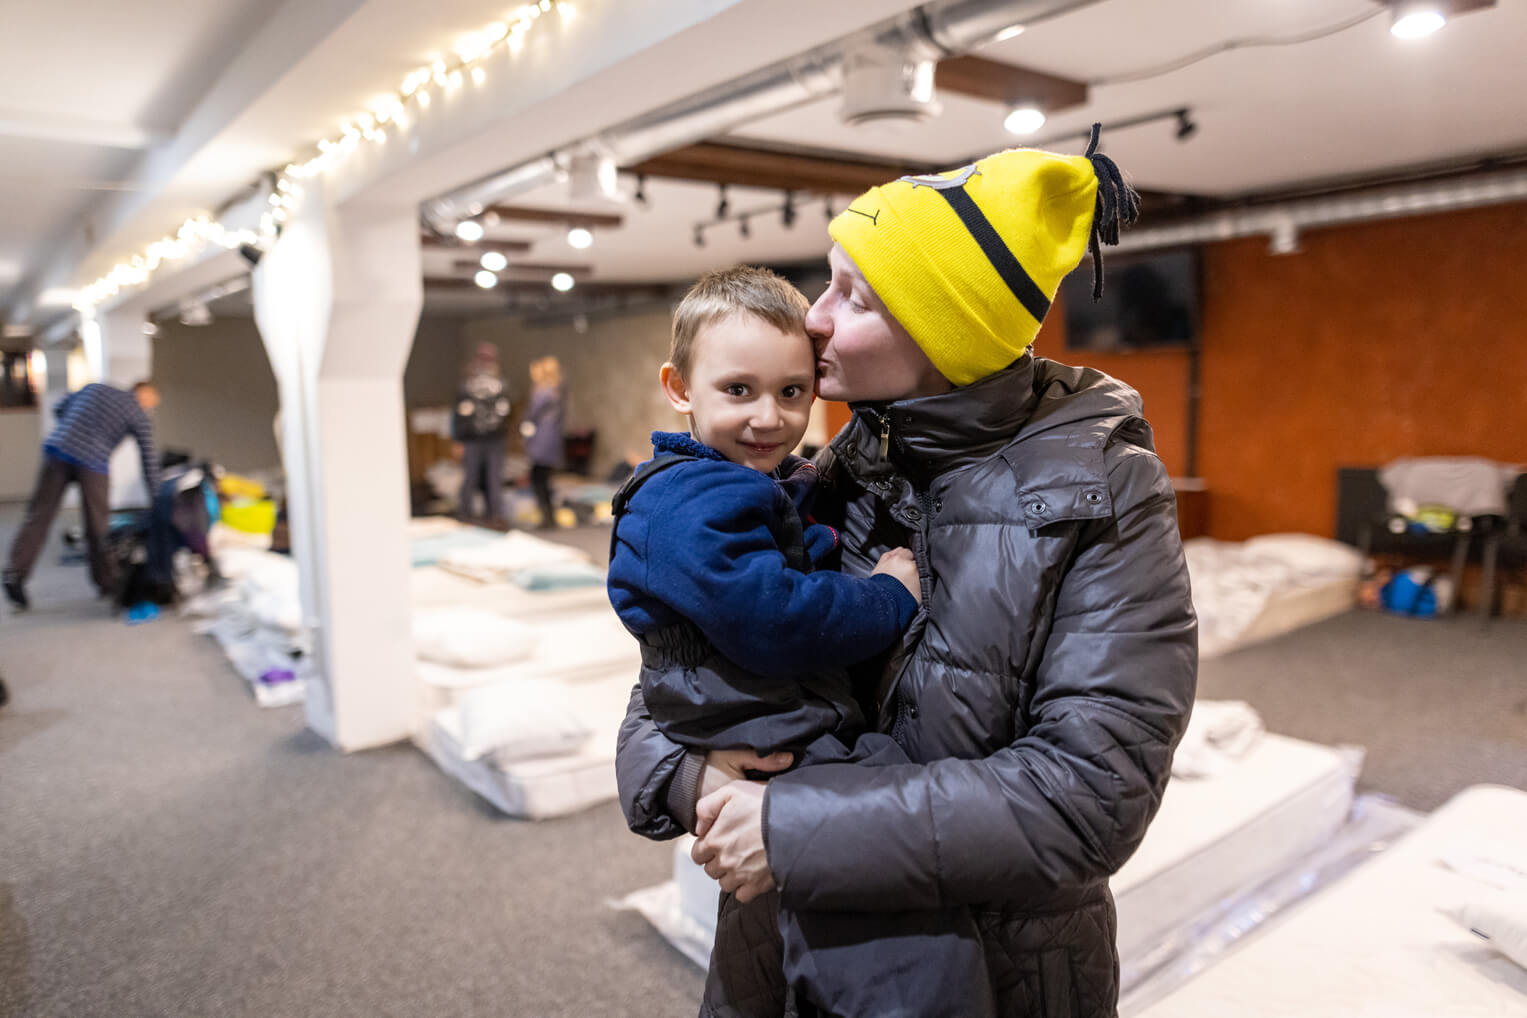 Through the physical aid we are providing Ukrainians, opportunities continue to grow to share the hope of Jesus Christ and remind hurting people that God has not forgotten them.